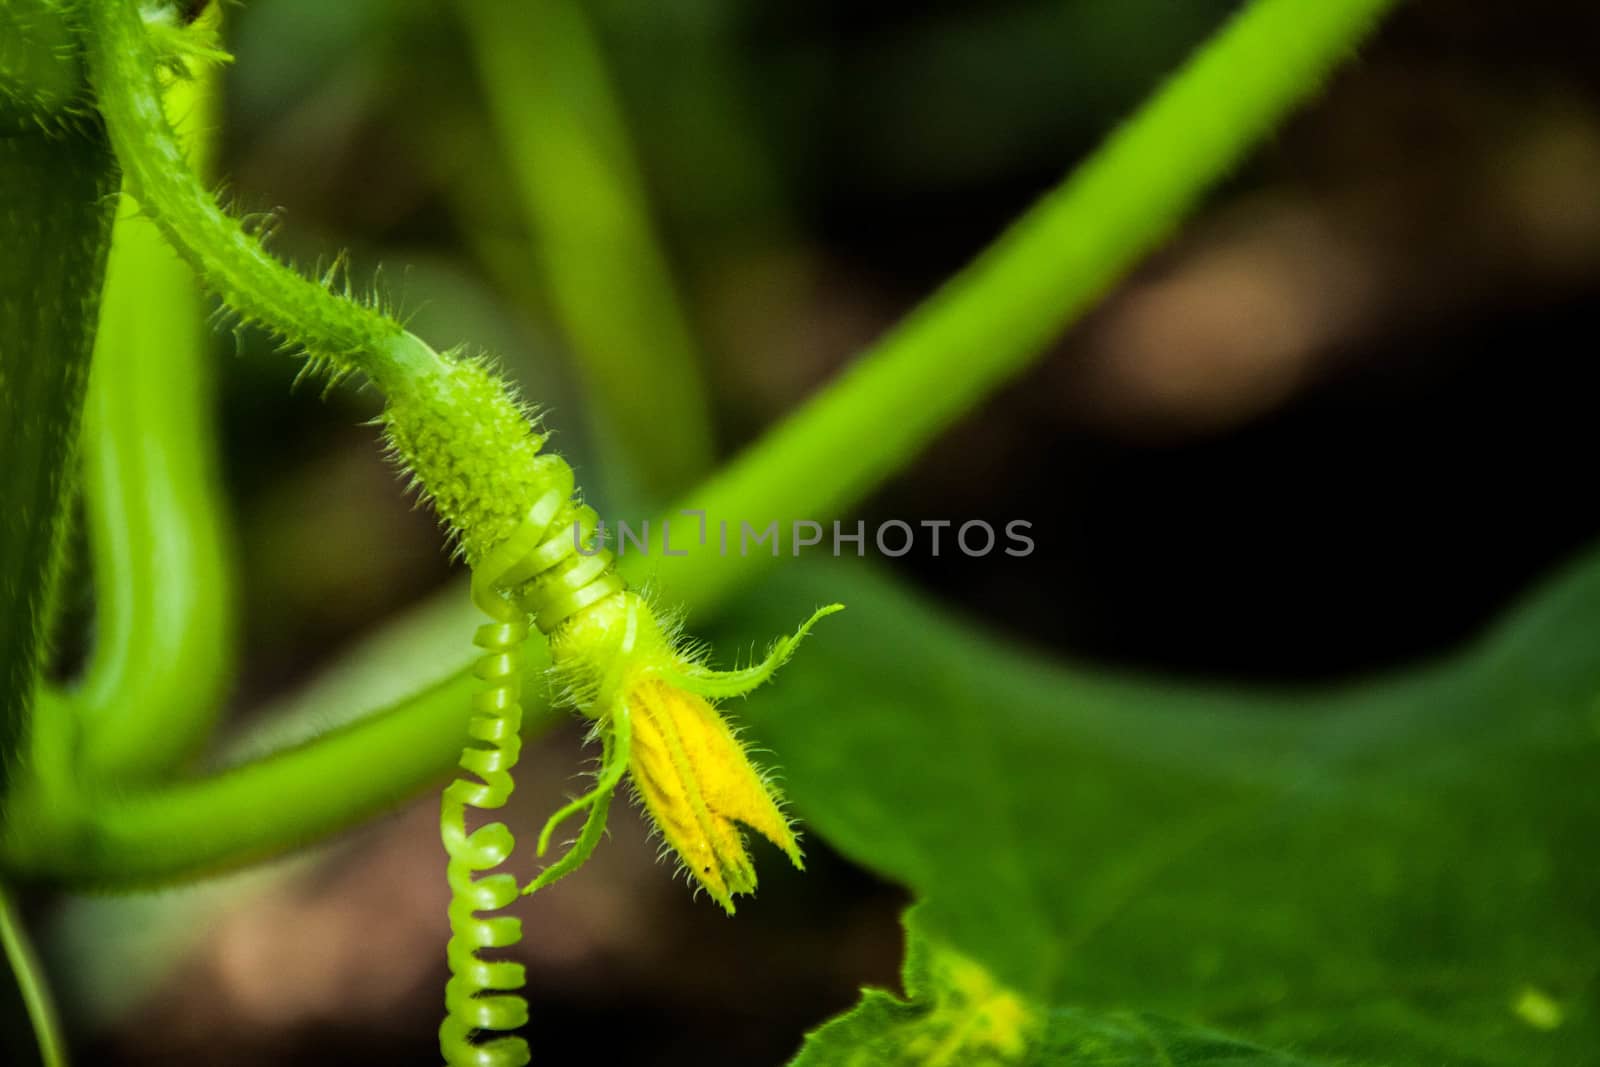 small cucumber grows on a natural background